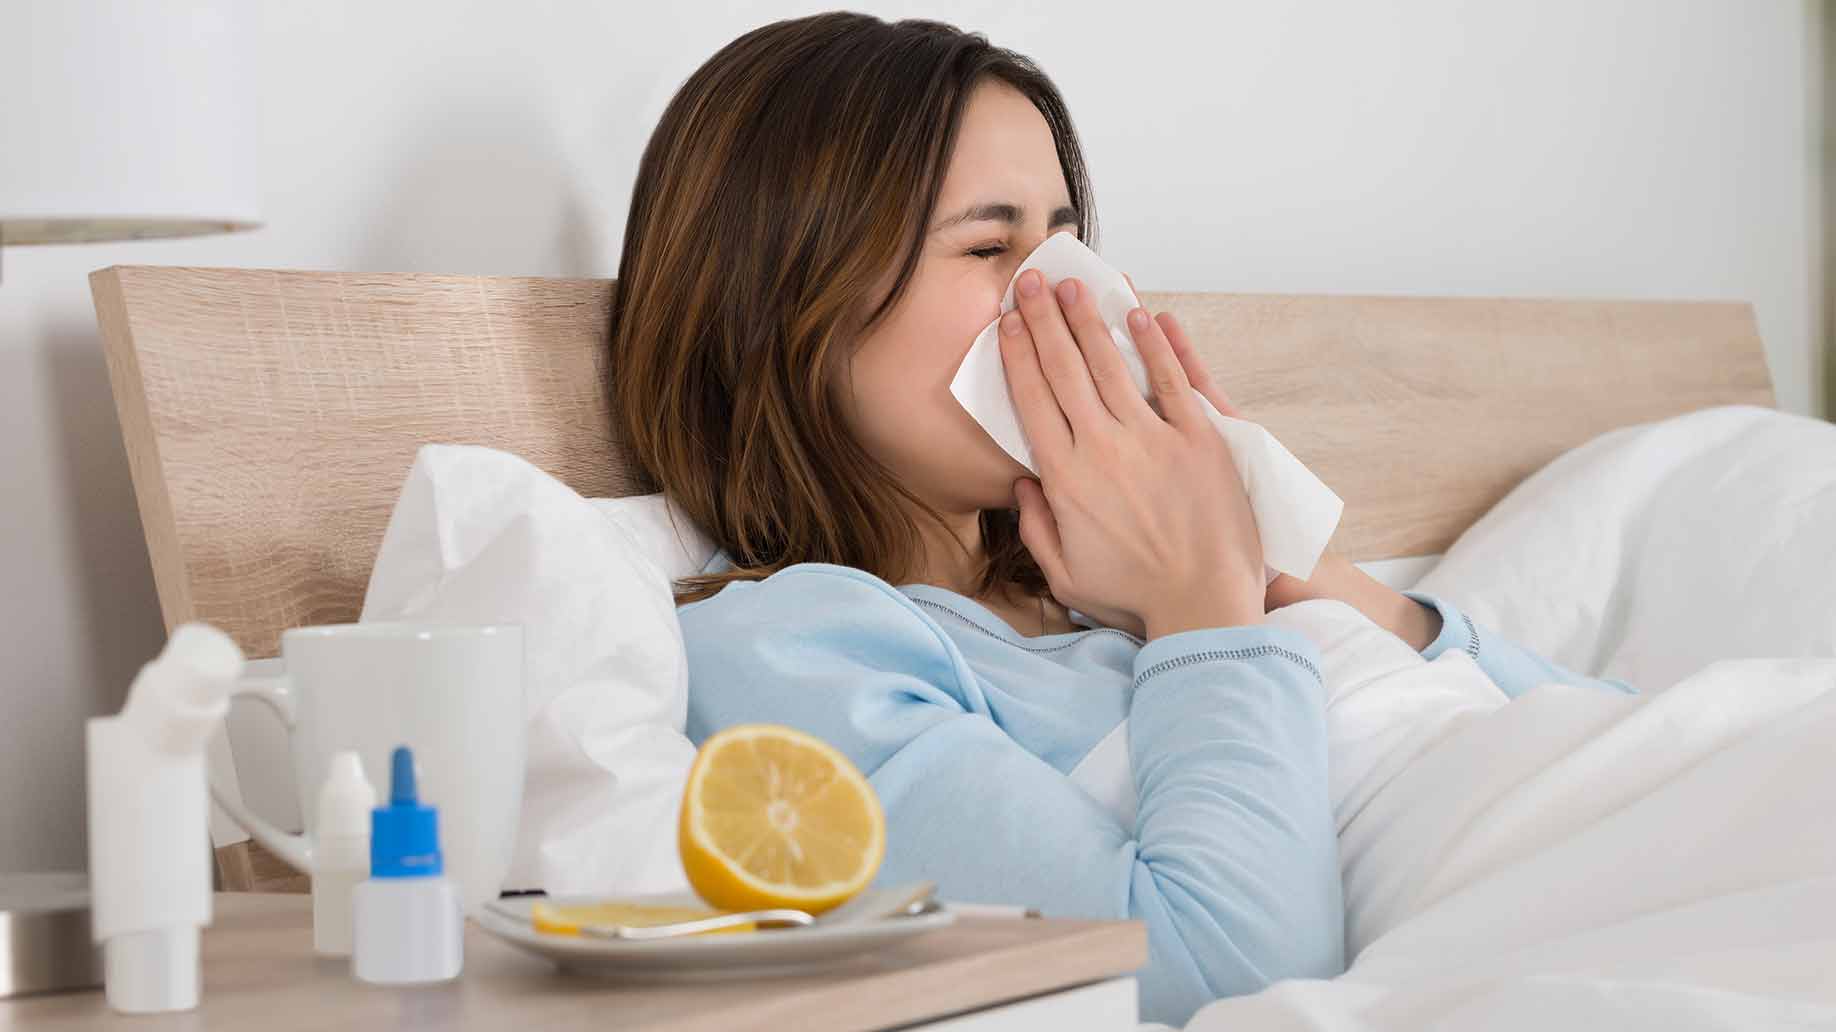 cold flu cough infection vitamin d boost immune system viral sick blowing nose